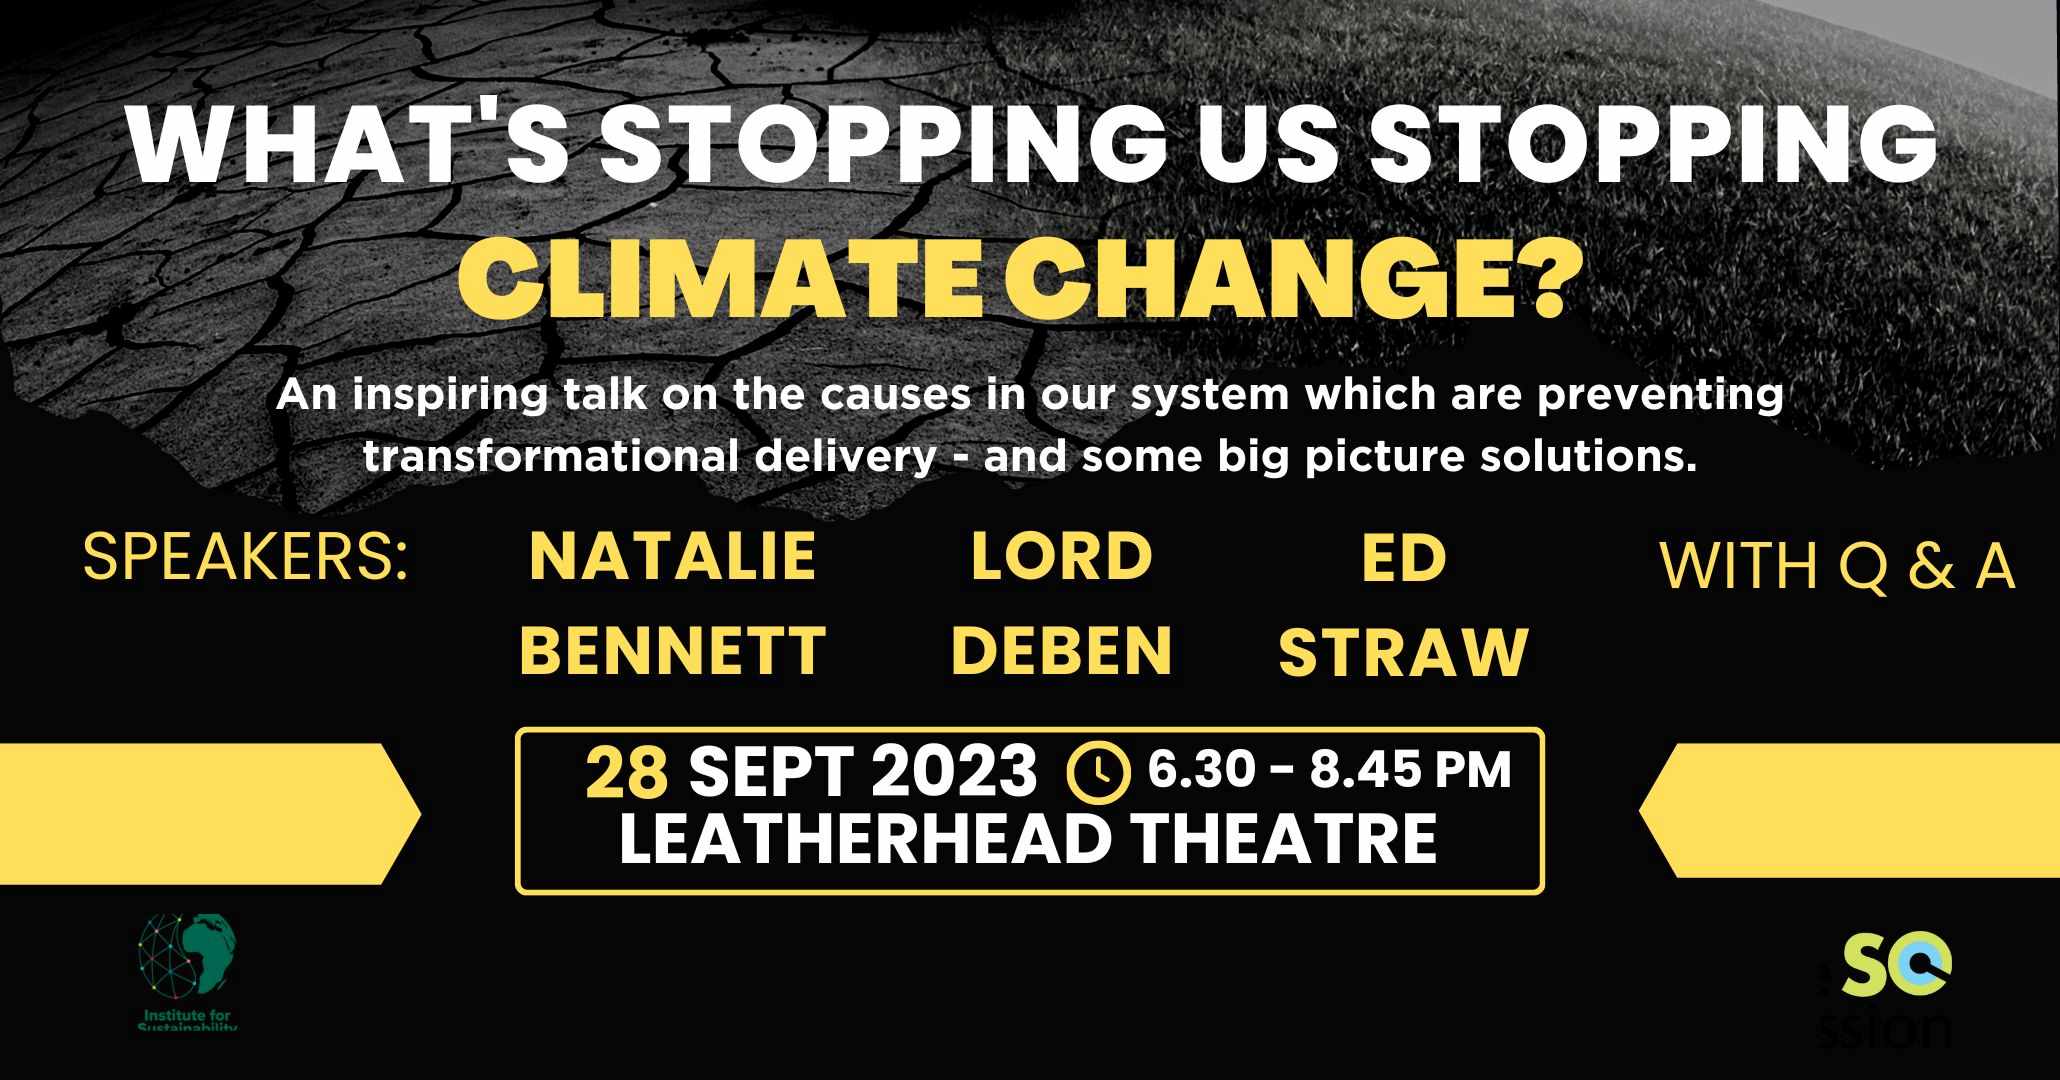 Flyer with information about upcoming event "What's Stopping Us Stopping Climate Change?"